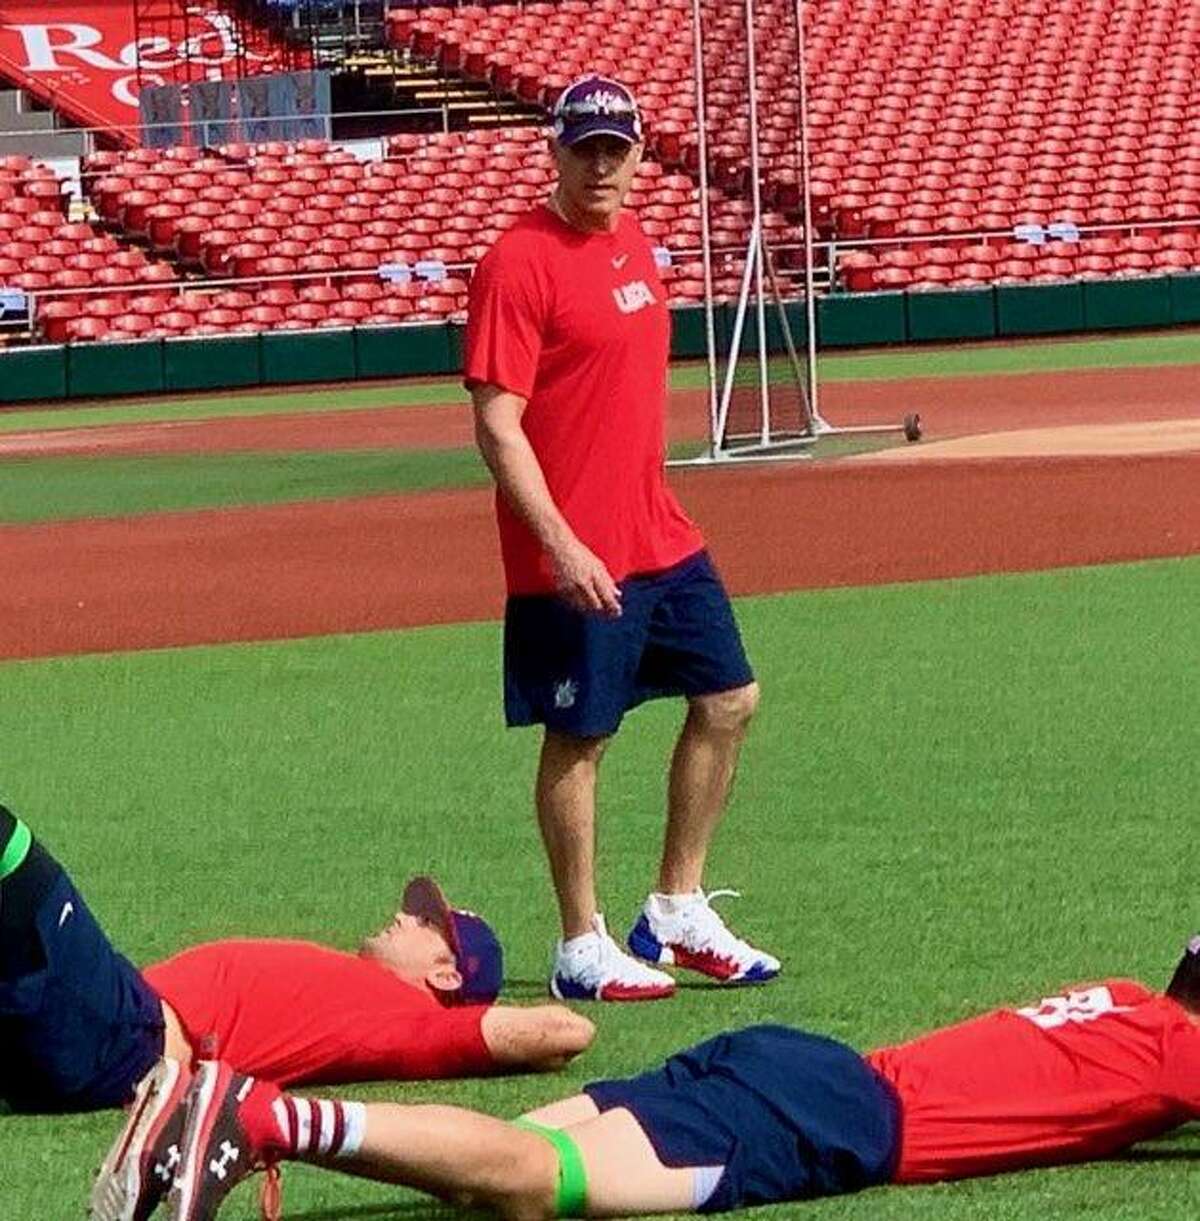 Orange’s Jim Ronai is the U.S. Olympic baseball team’s strength and conditioning coach and physical therapist as well as the assistant athletic trainer in Tokyo.